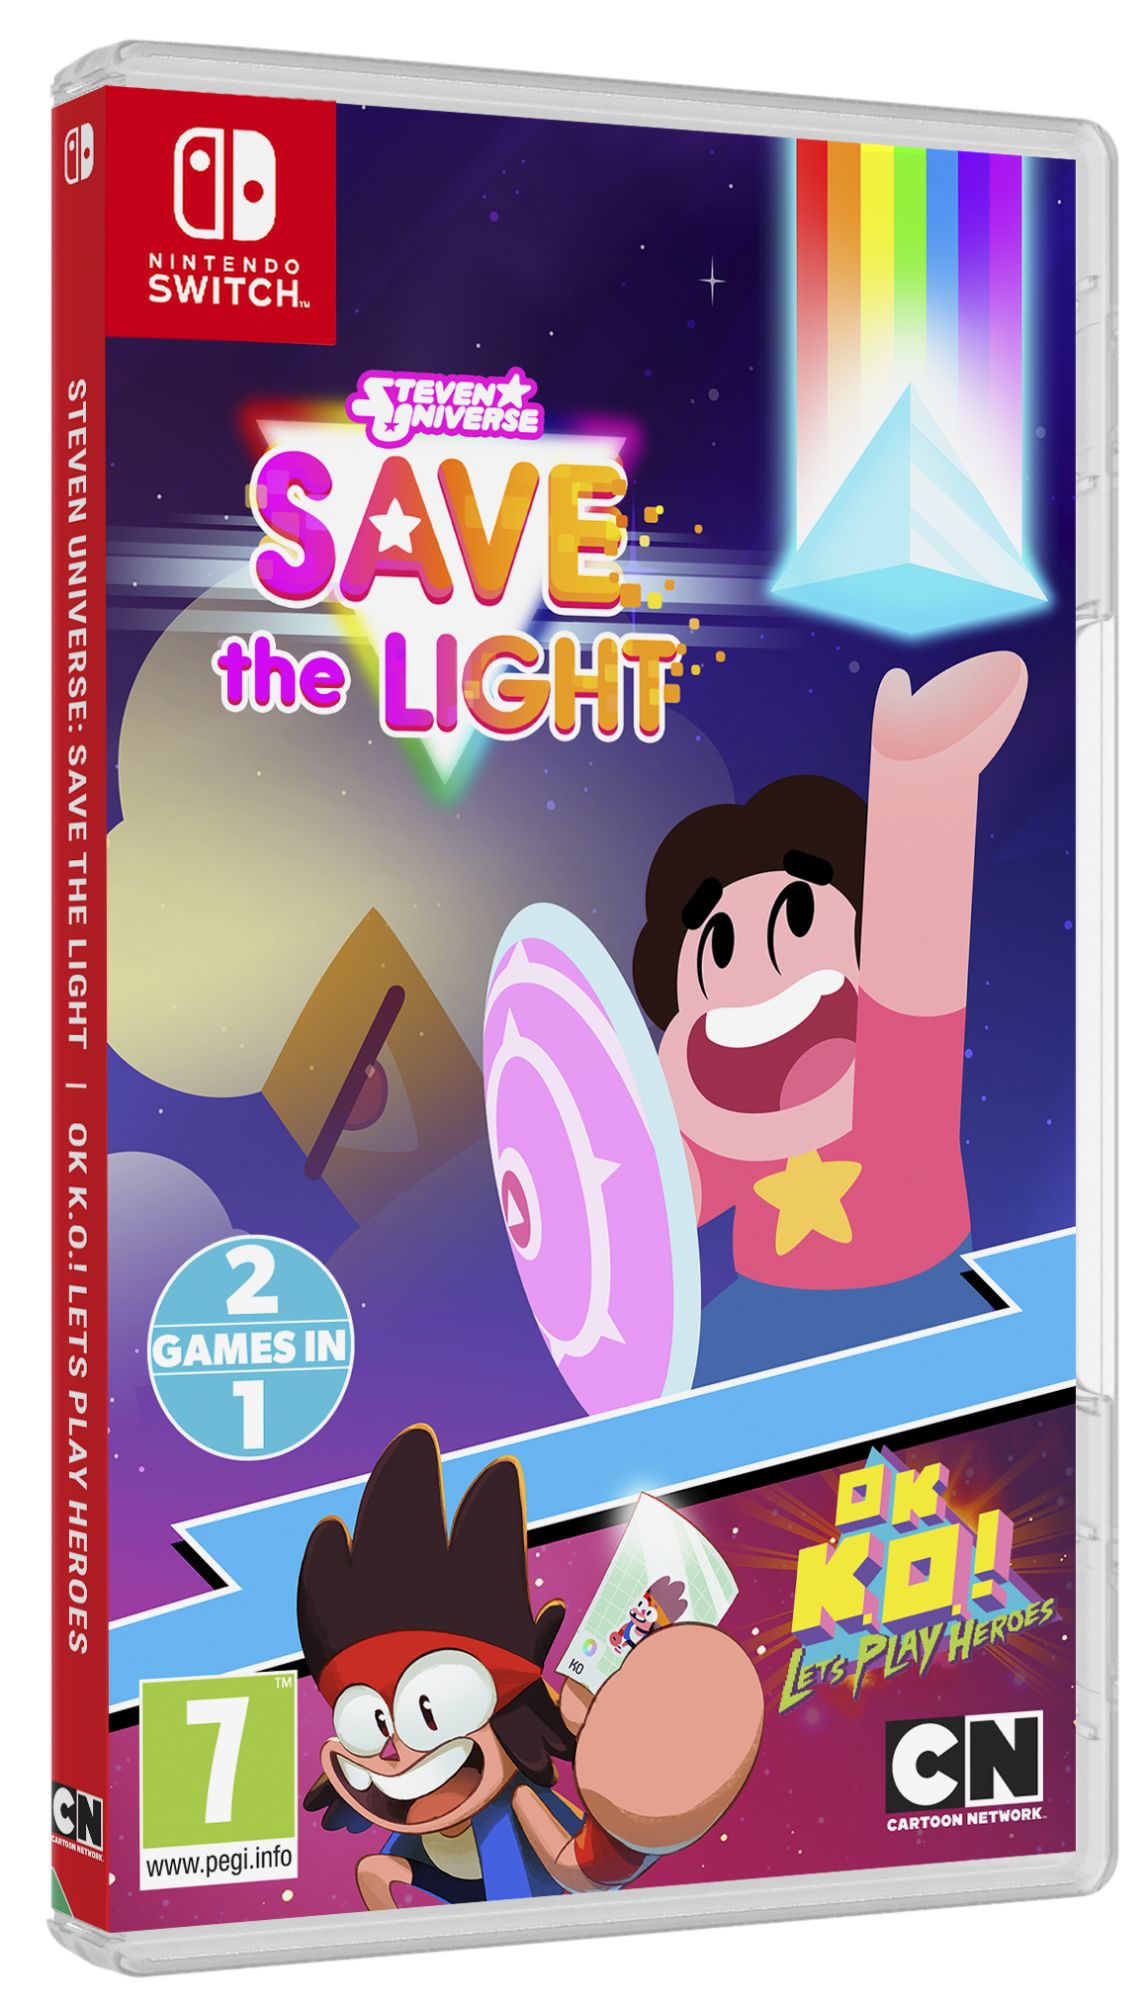 Steven Universe: Save the Light / OK K.O.! Let's Play Heroes - 2 Games in 1